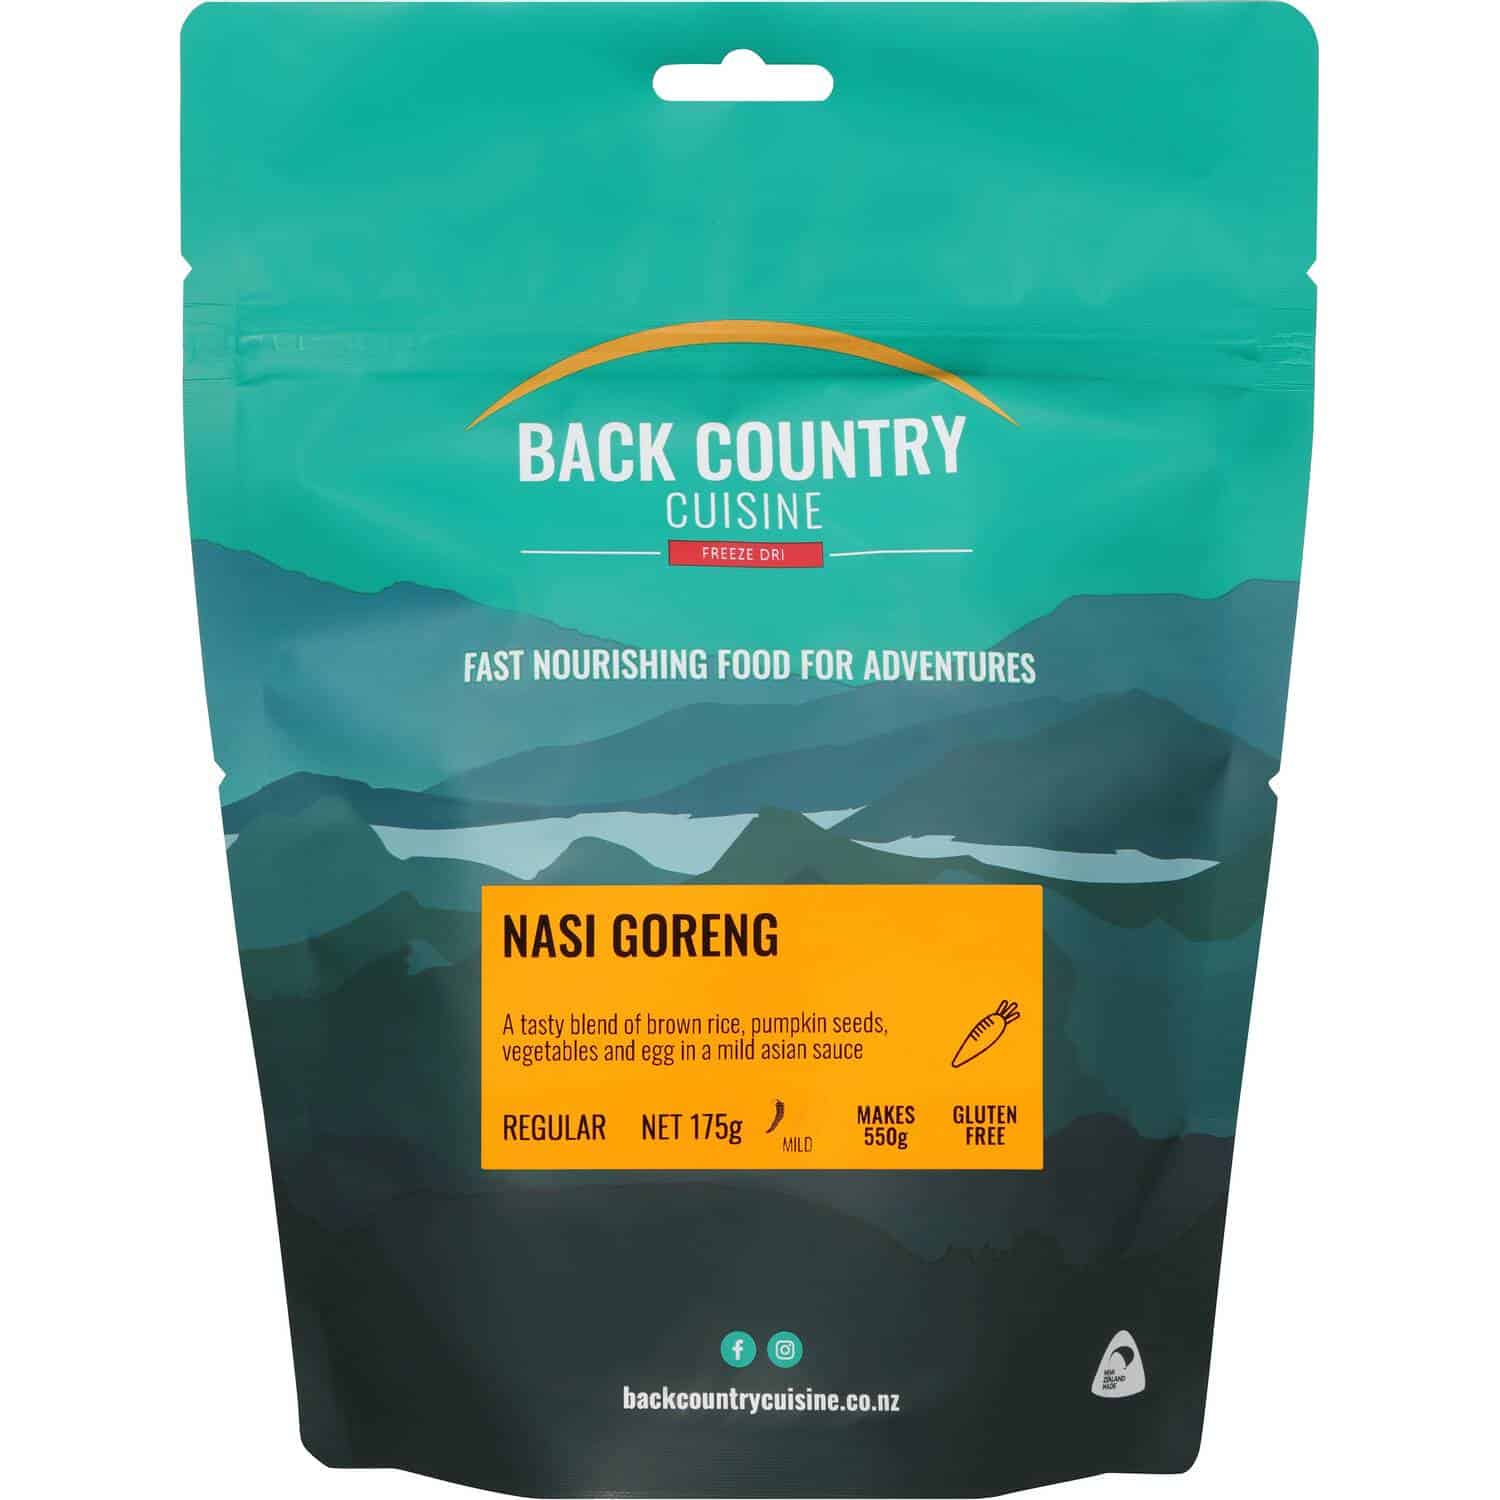 Back Country Cuisine Nasi Goreng Regular - Tramping Food and Accessories sold by Venture Outdoors NZ